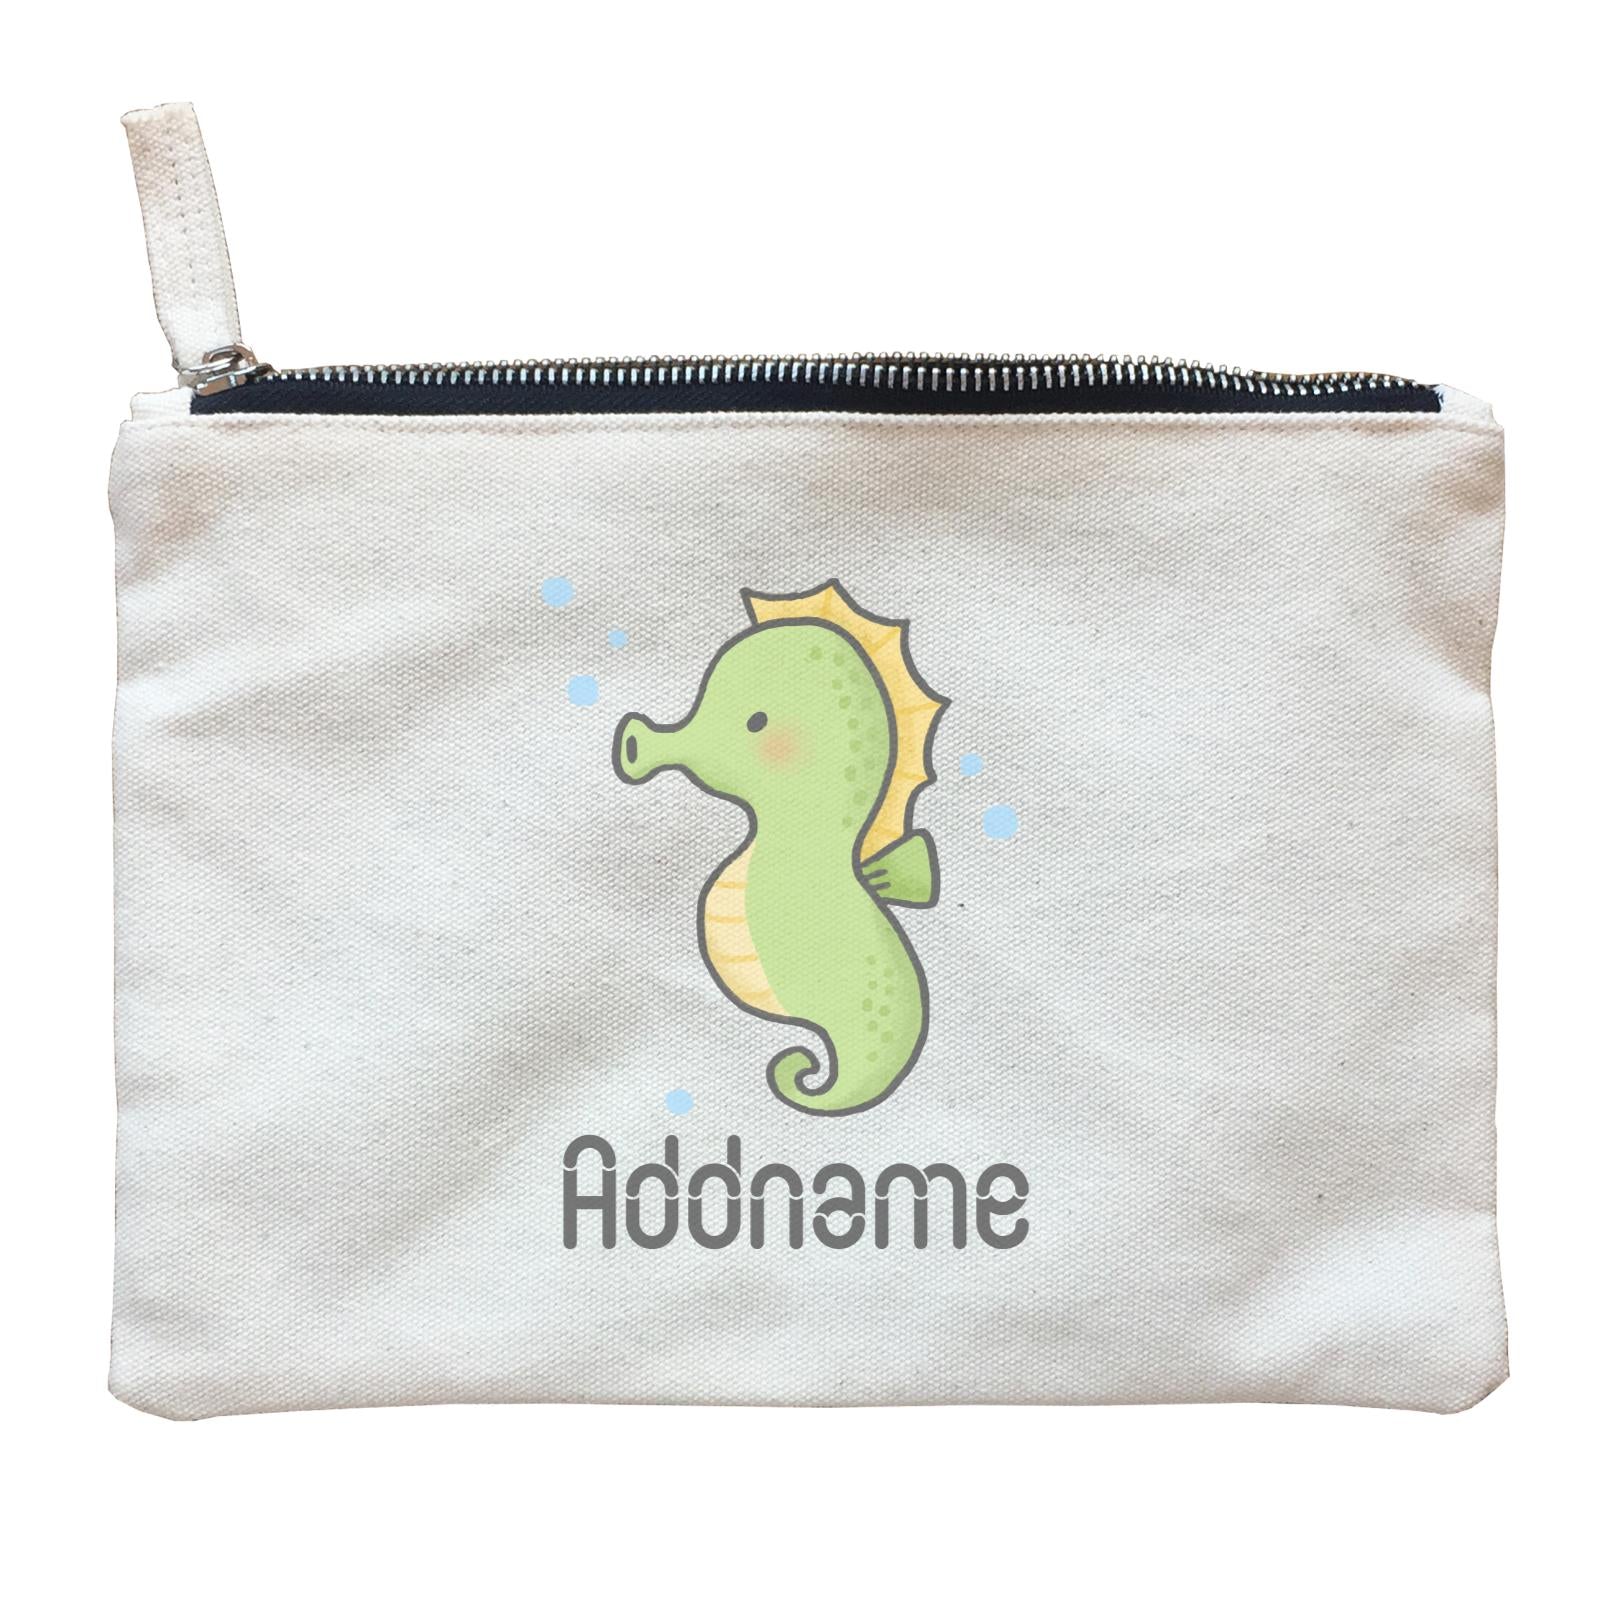 Cute Hand Drawn Style Seahorse Addname Zipper Pouch